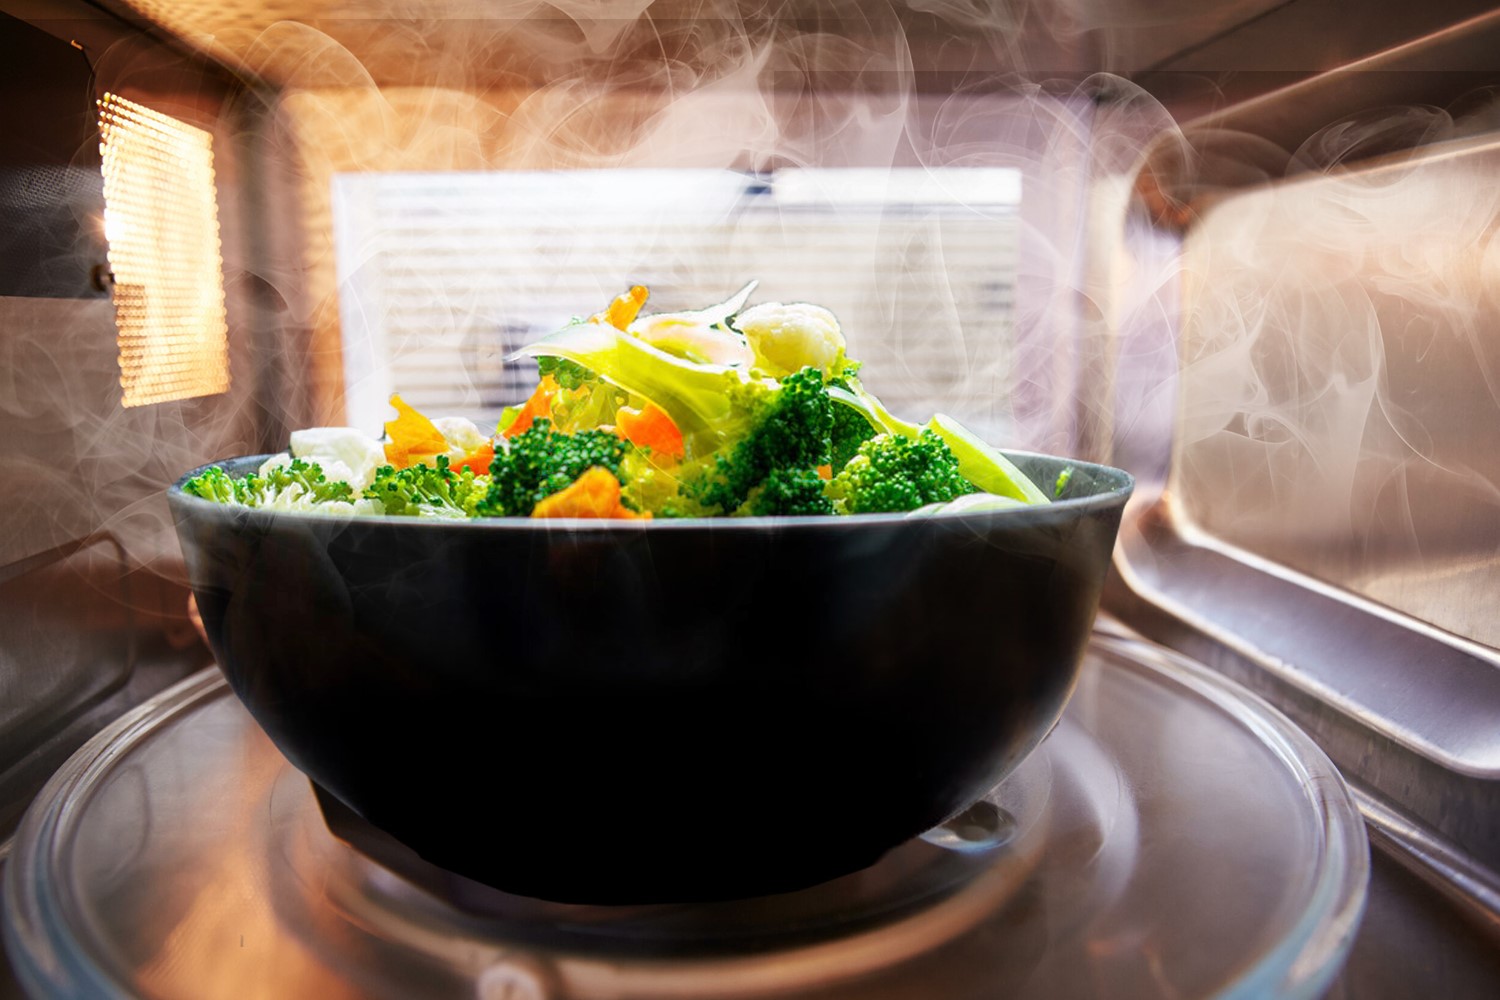 How to Steam Vegetables in the Microwave 